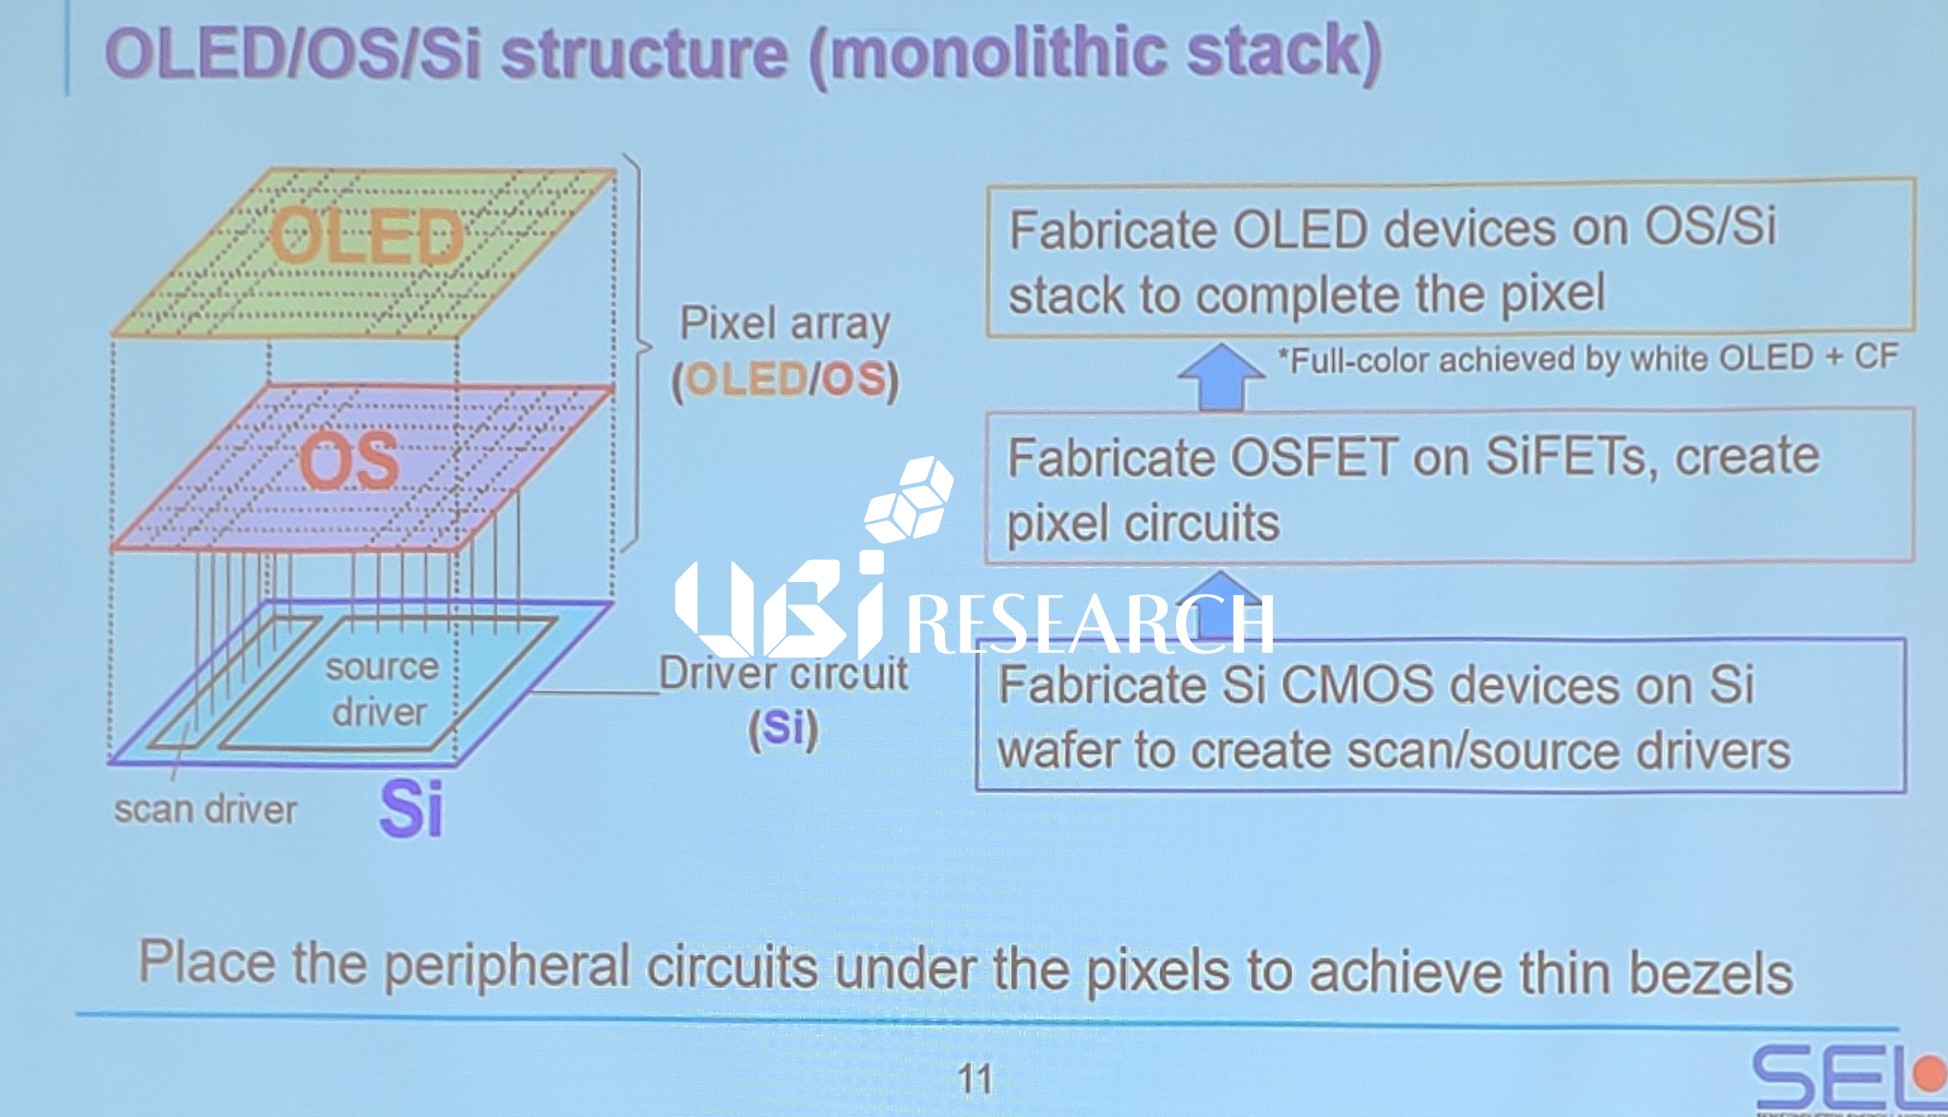 OLED, OS, Si structure/SEL